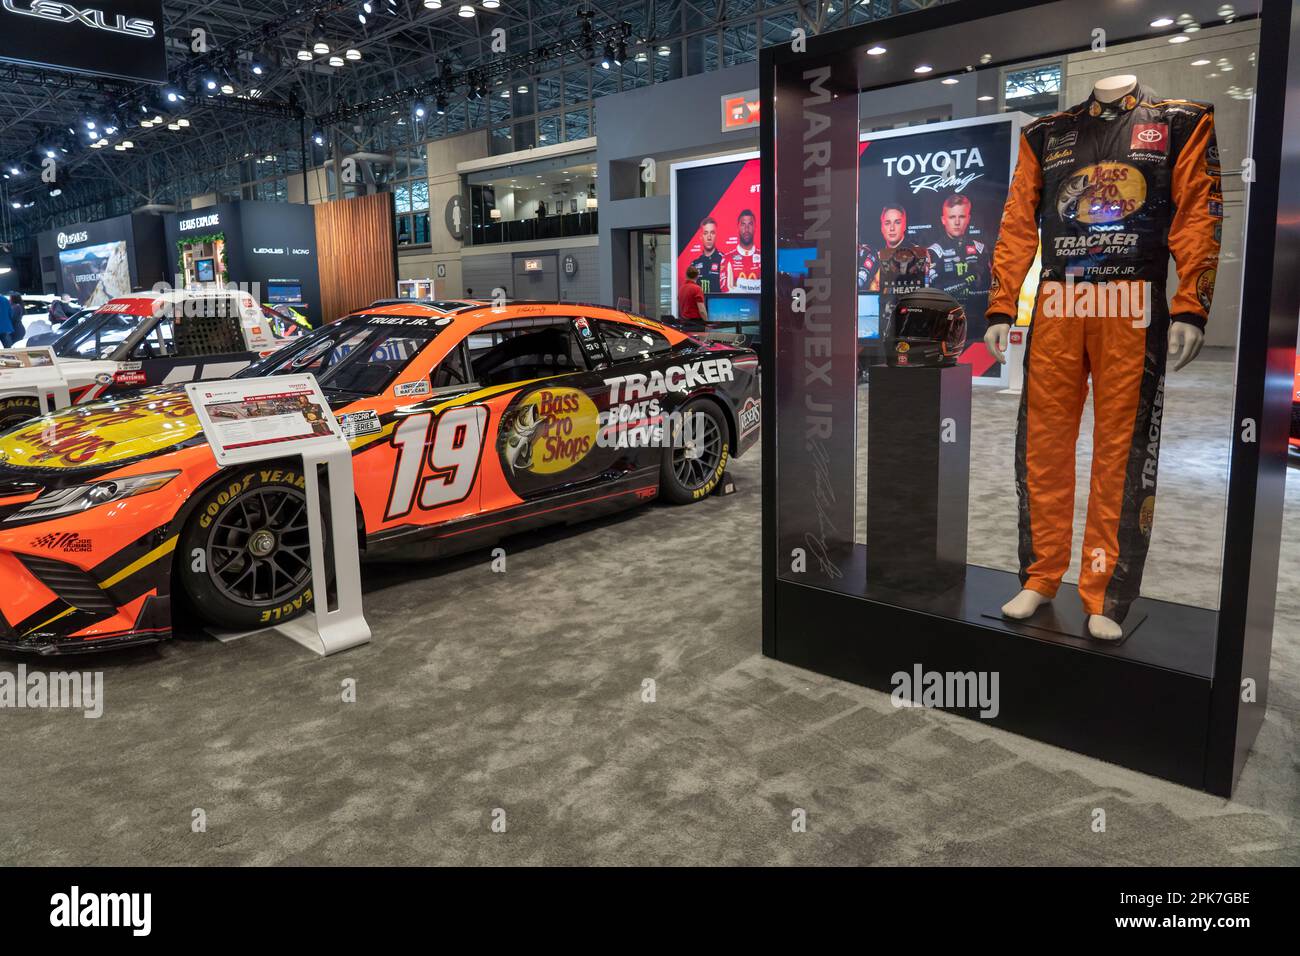 NEW YORK, NEW YORK - APRIL 05: A Joe Gibbs Racing #19 Camry Cup Car driven by Martin Truex Jr. seen at the International Auto Show press preview at the Jacob Javits Convention Center on April 5, 2023 in New York City. (Photo by Ron Adar / SOPA Images/Sipa USA) Stock Photo